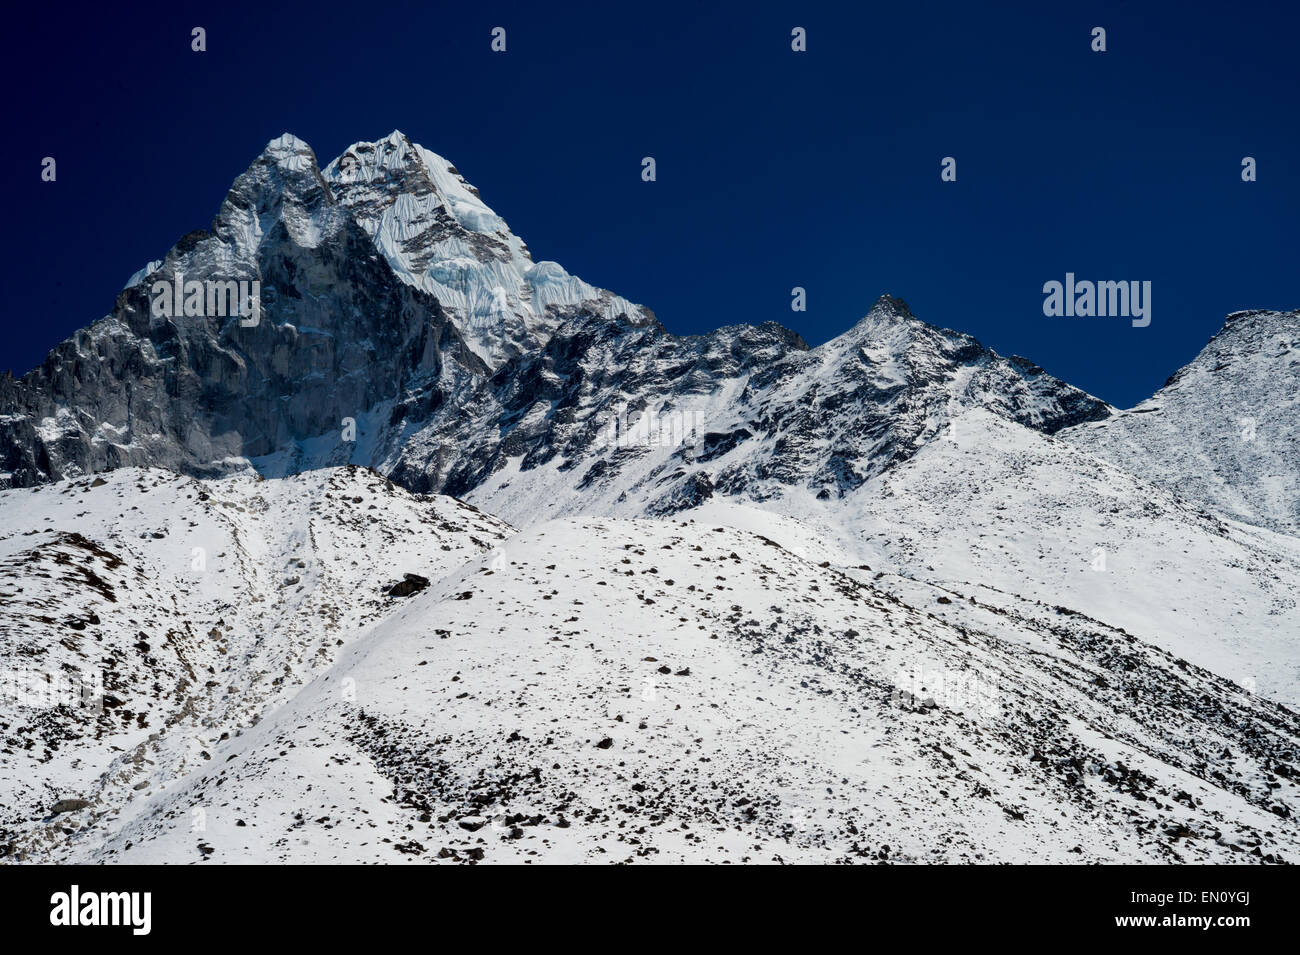 Ama Dablam moutain (6814 m) in the Himalayas, Nepal Stock Photo